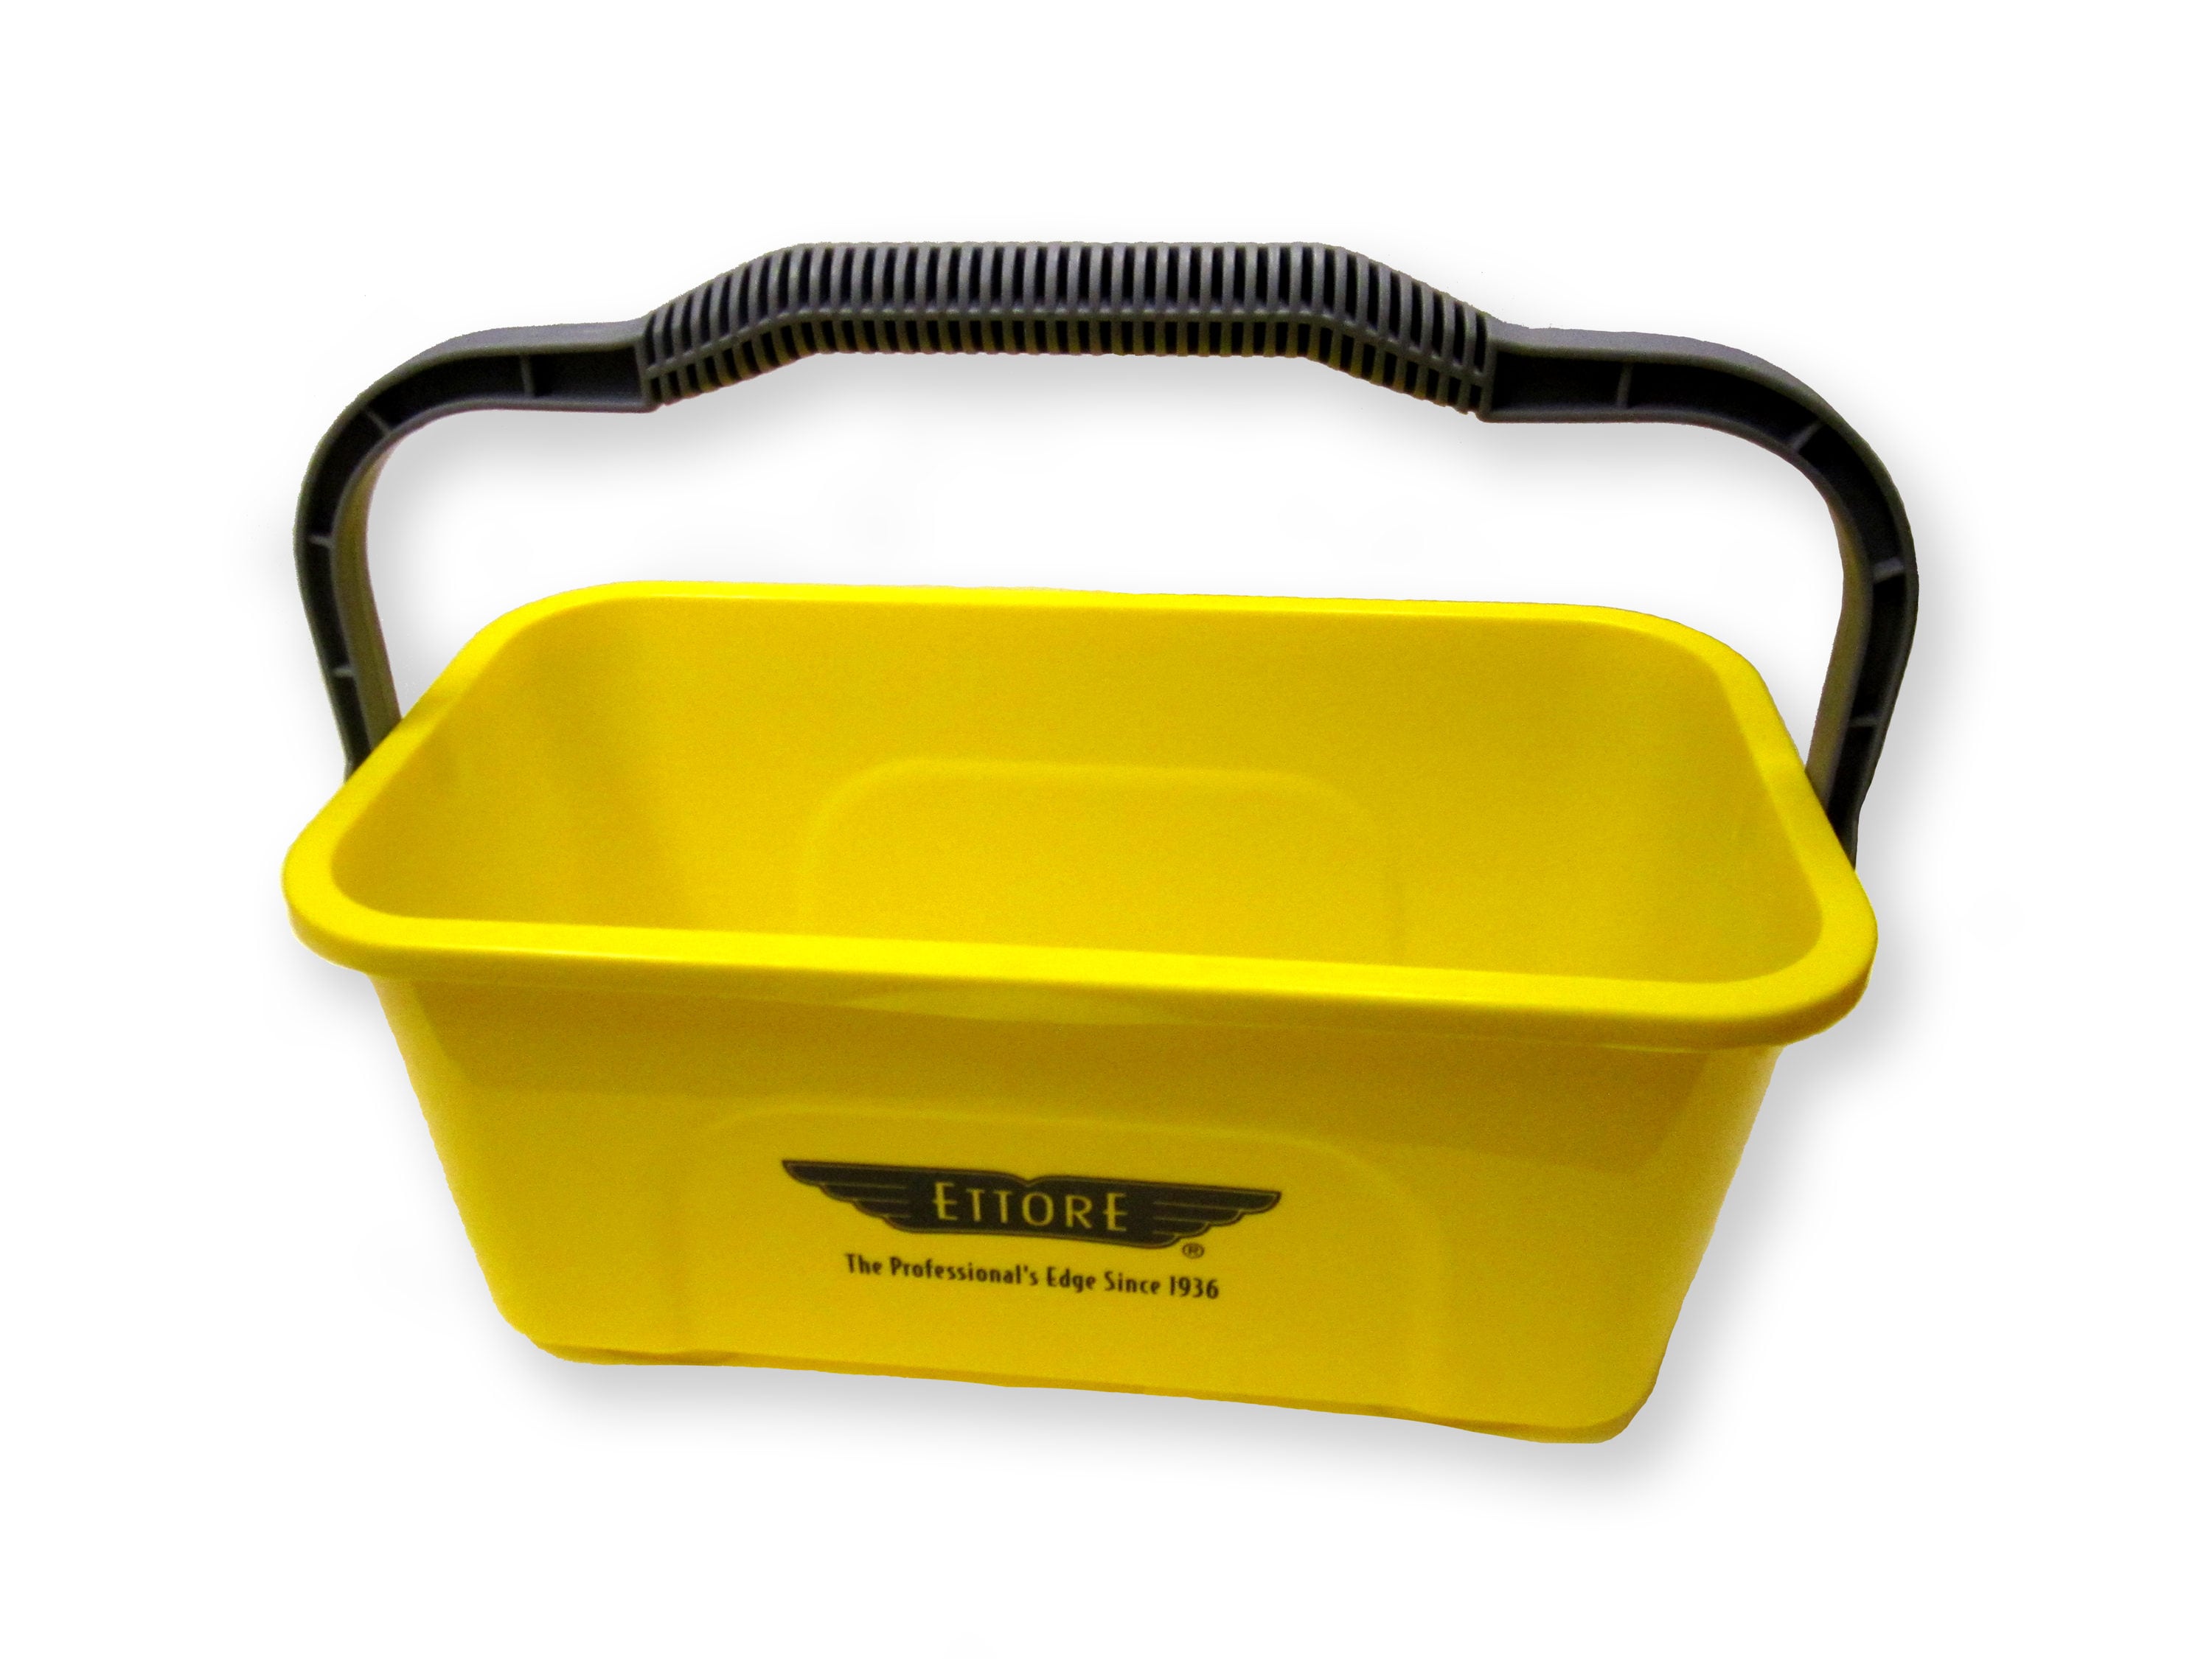 rectangle plastic buckets with lid manufacture free sample